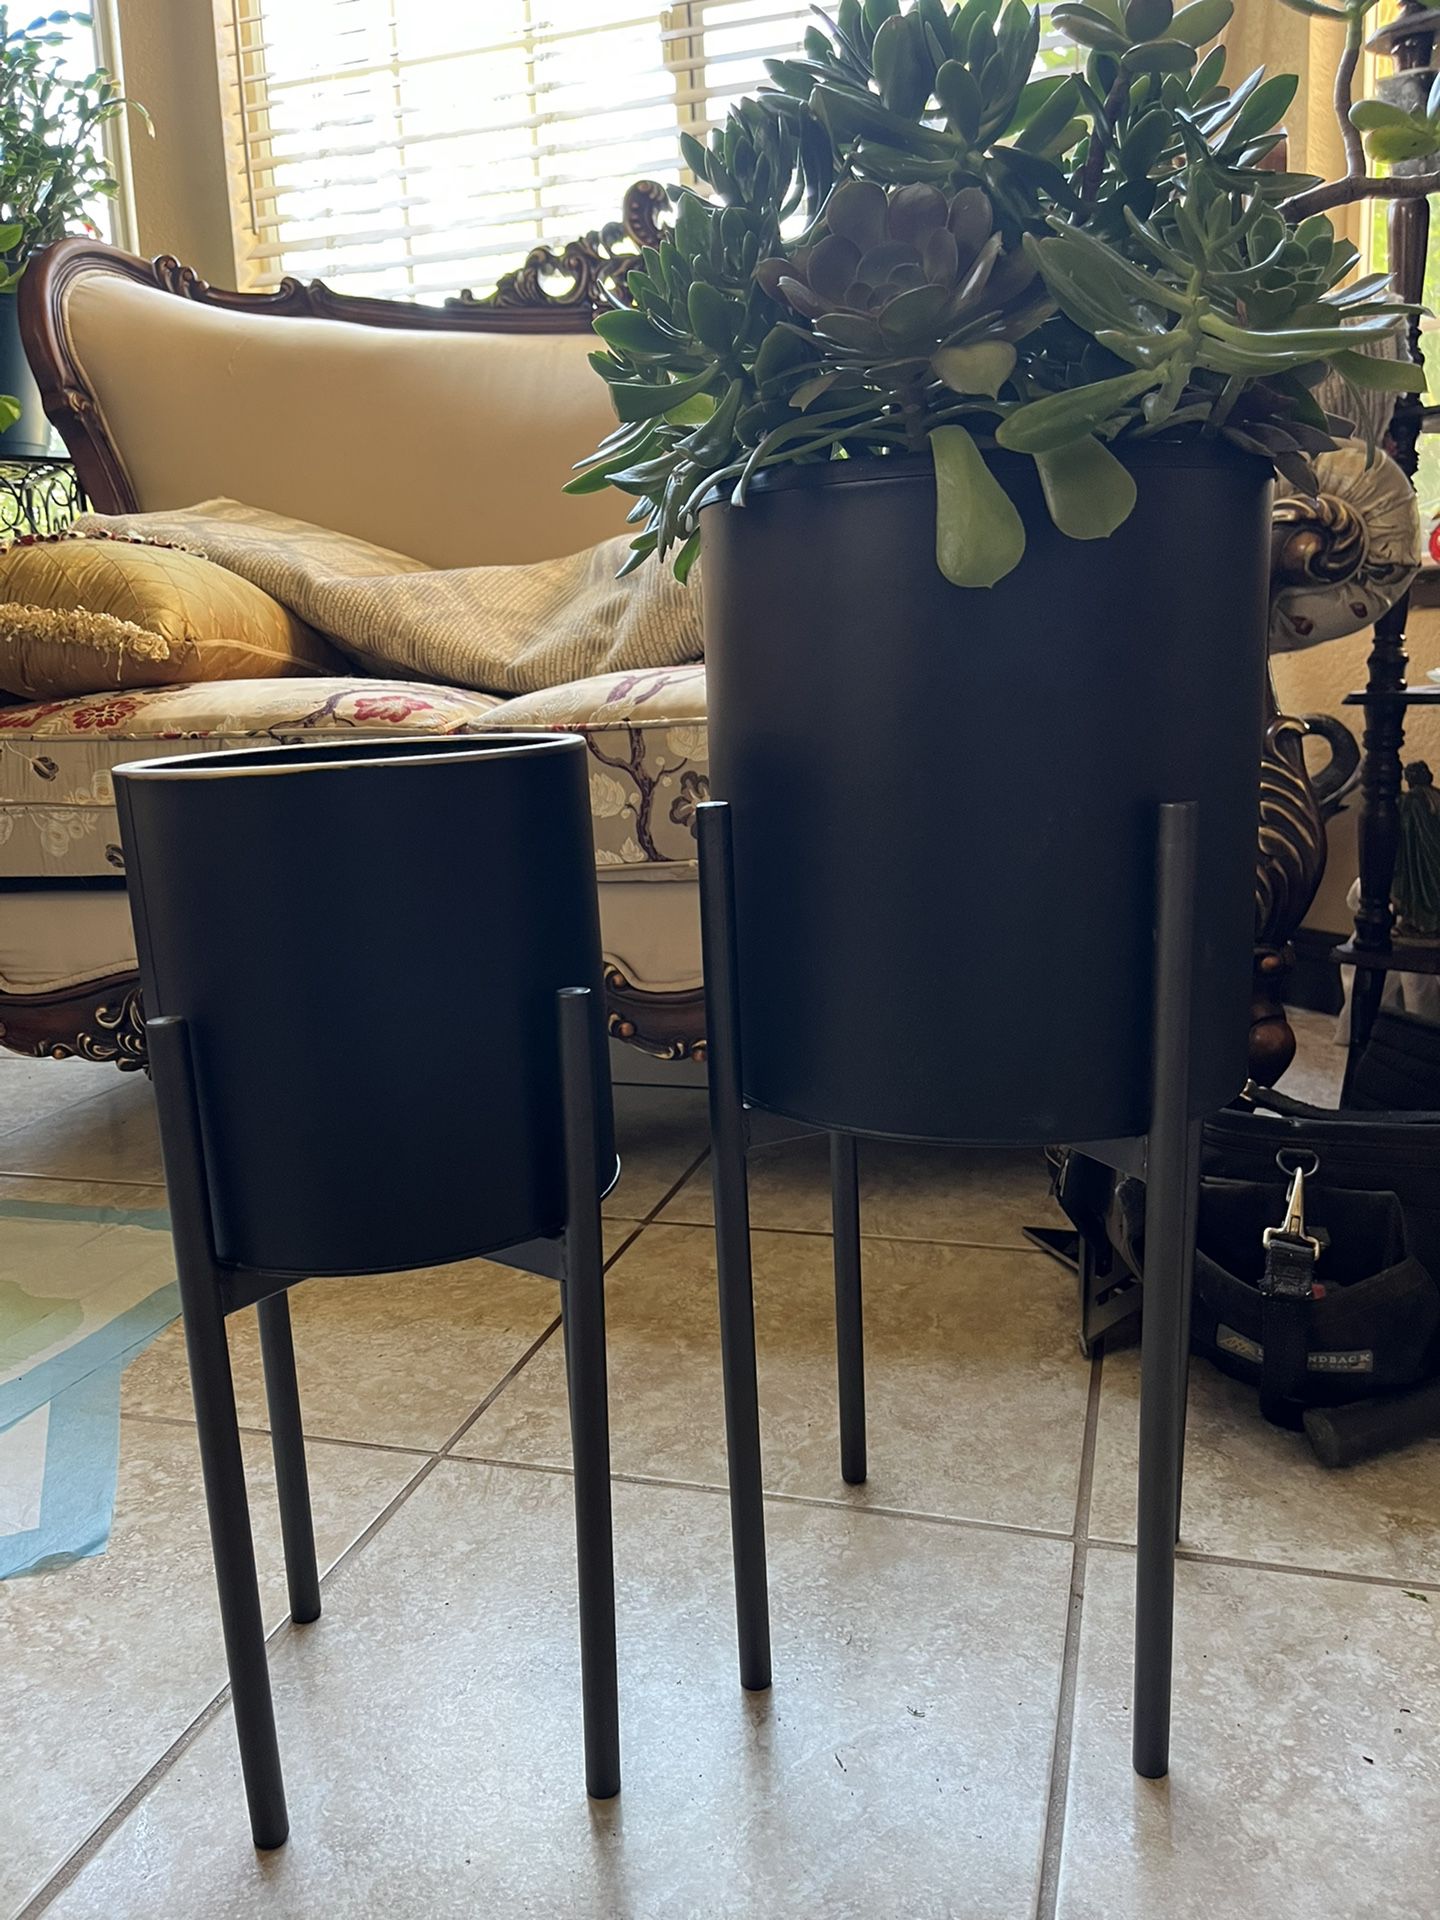 Maint Mesa Modern Boho Metal Planters With Gold Rim And Stand